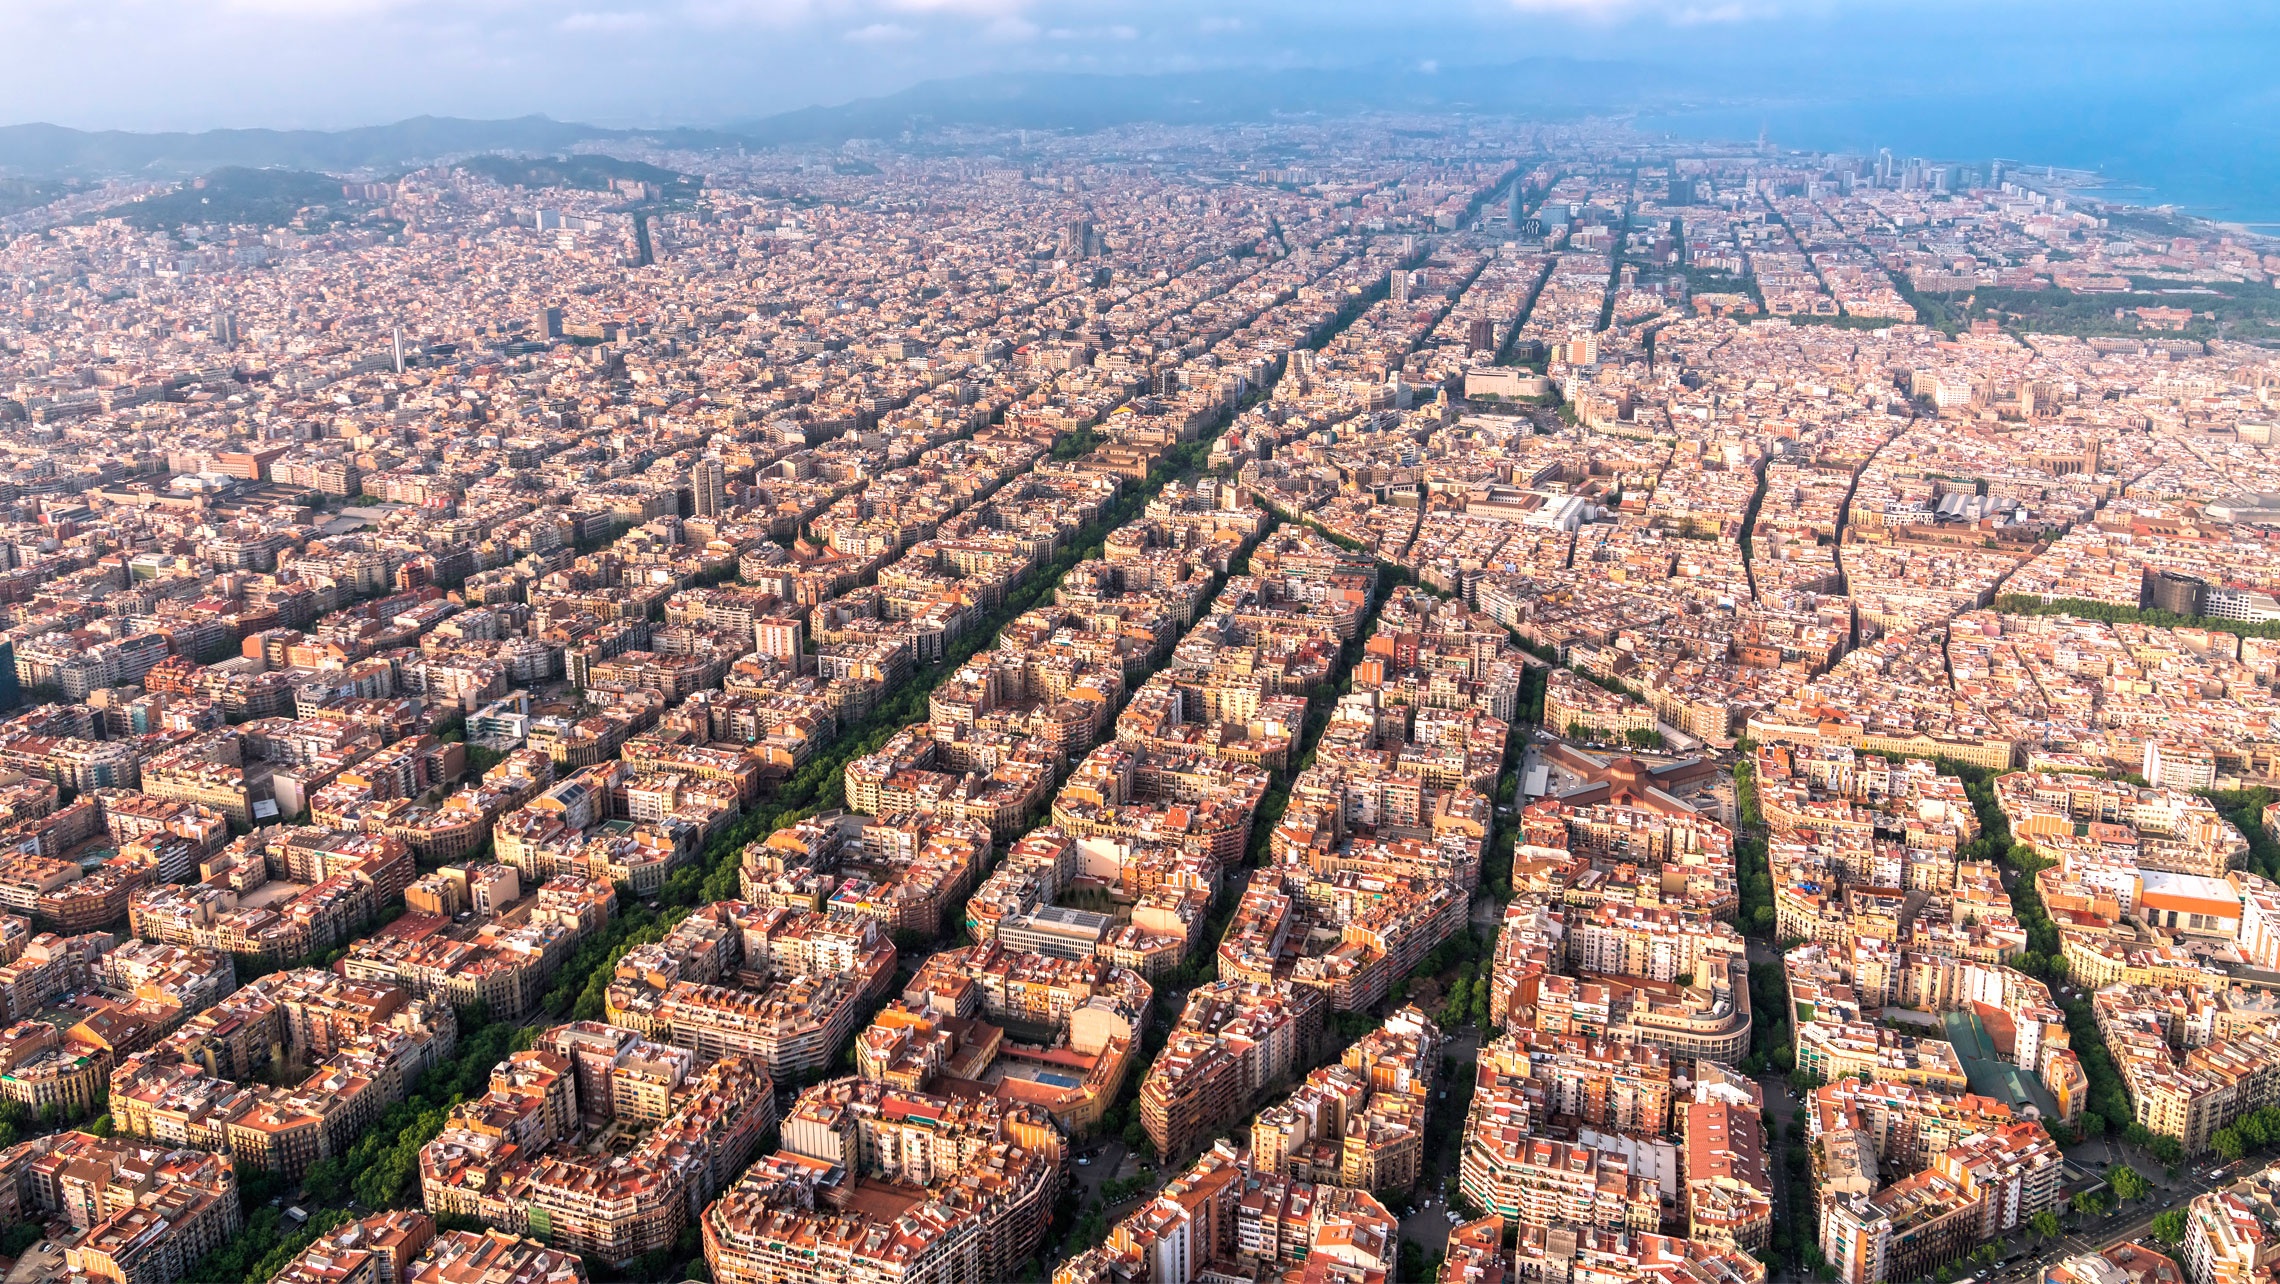 Inprocess relocates its headquarters in Barcelona